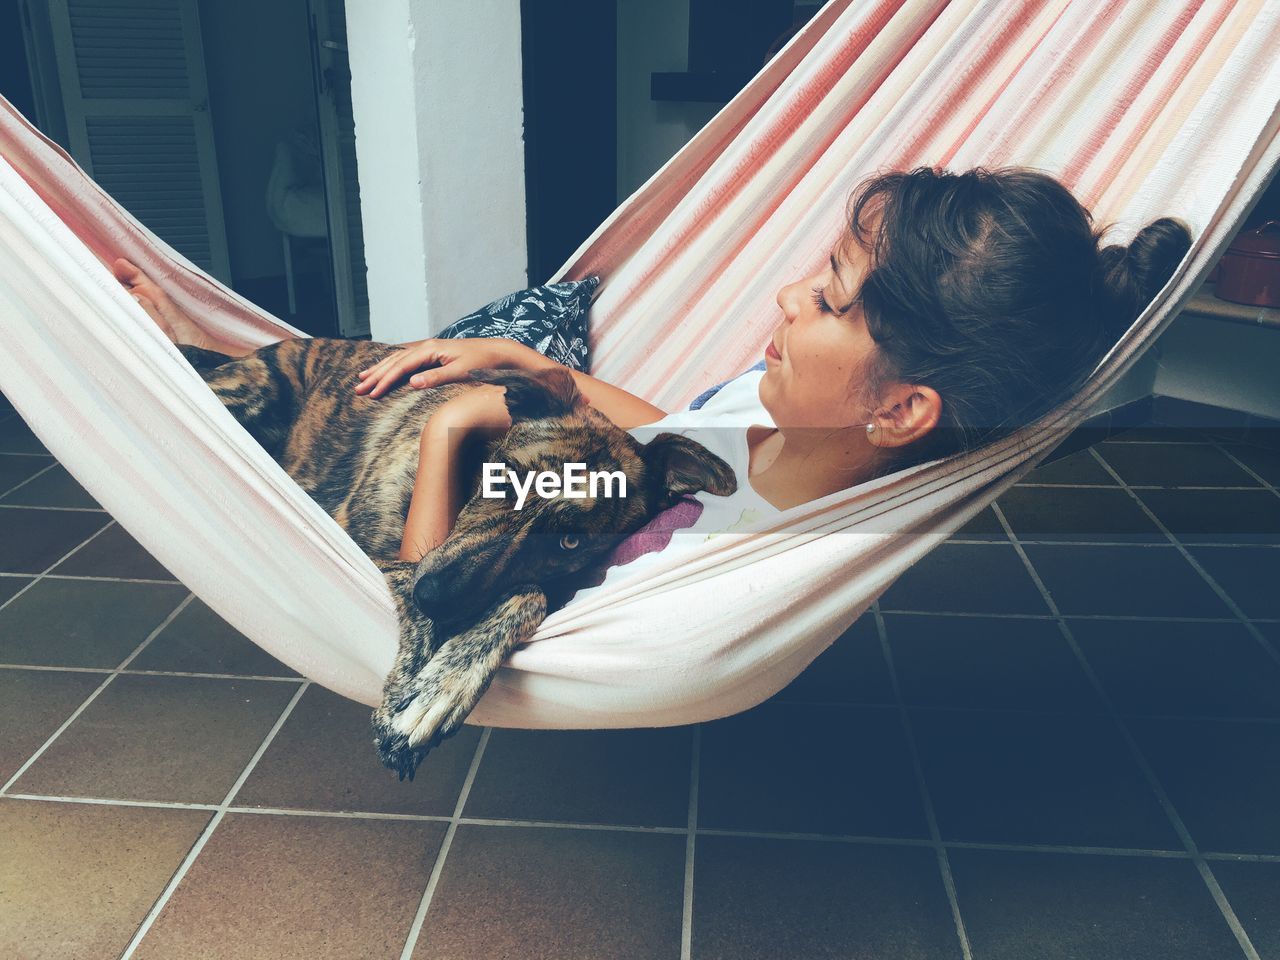 Woman relaxing in hammock with her dog